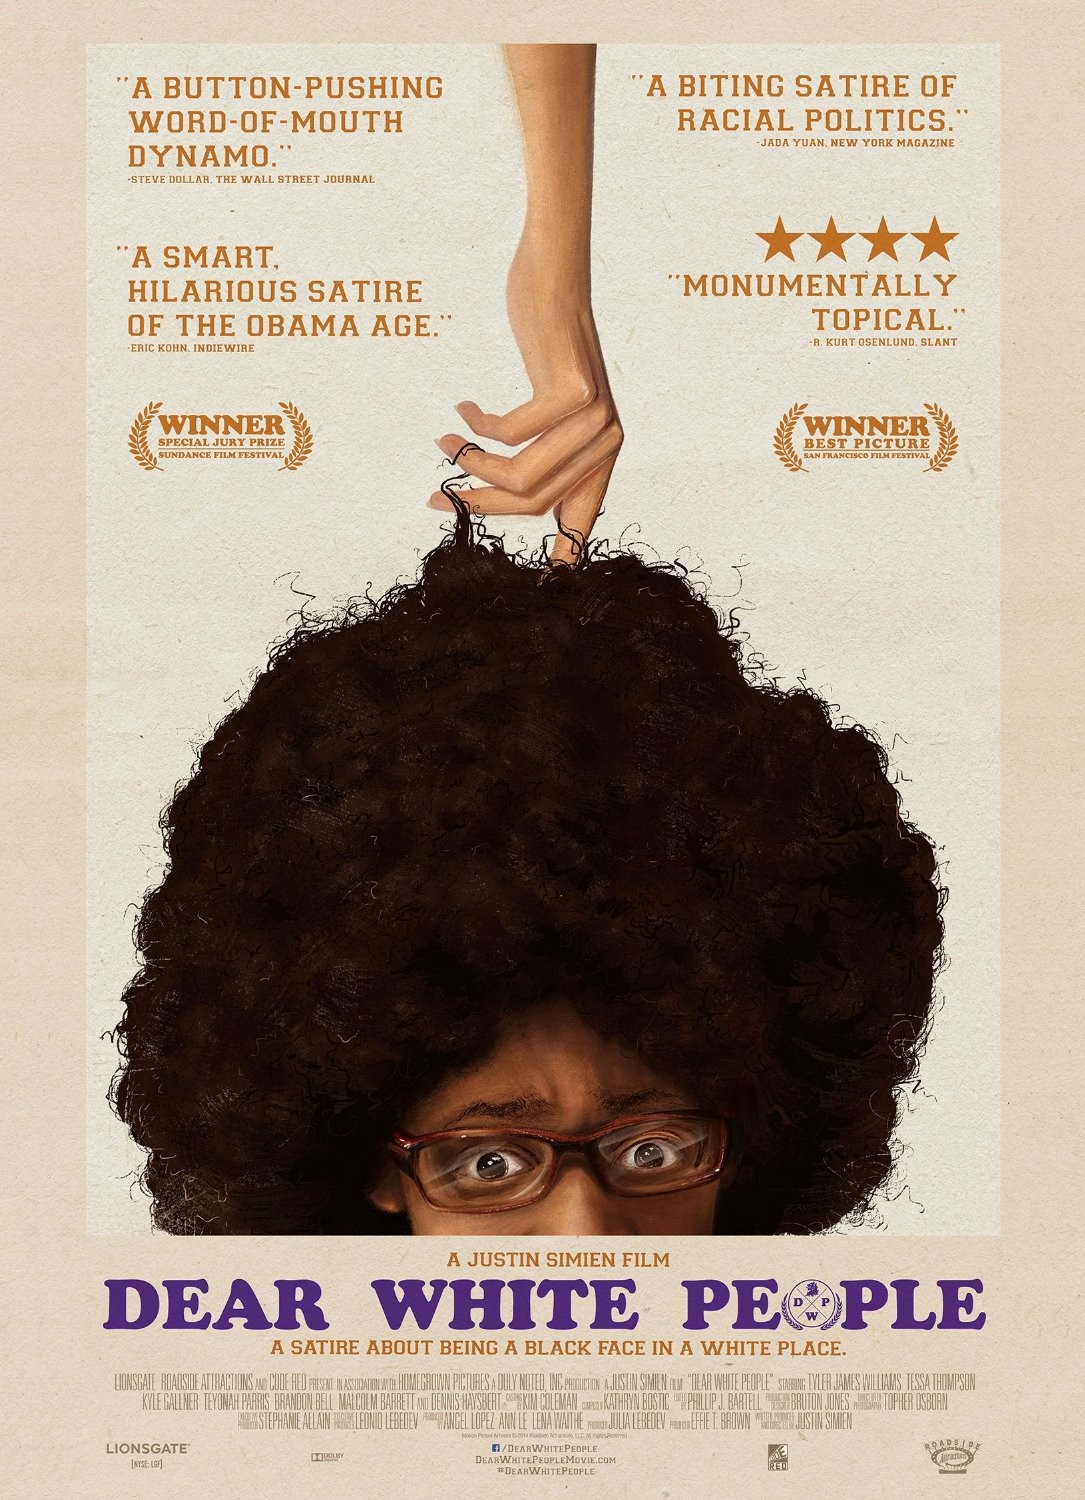 Poster of Roadside Attractions' Dear White People (2014)